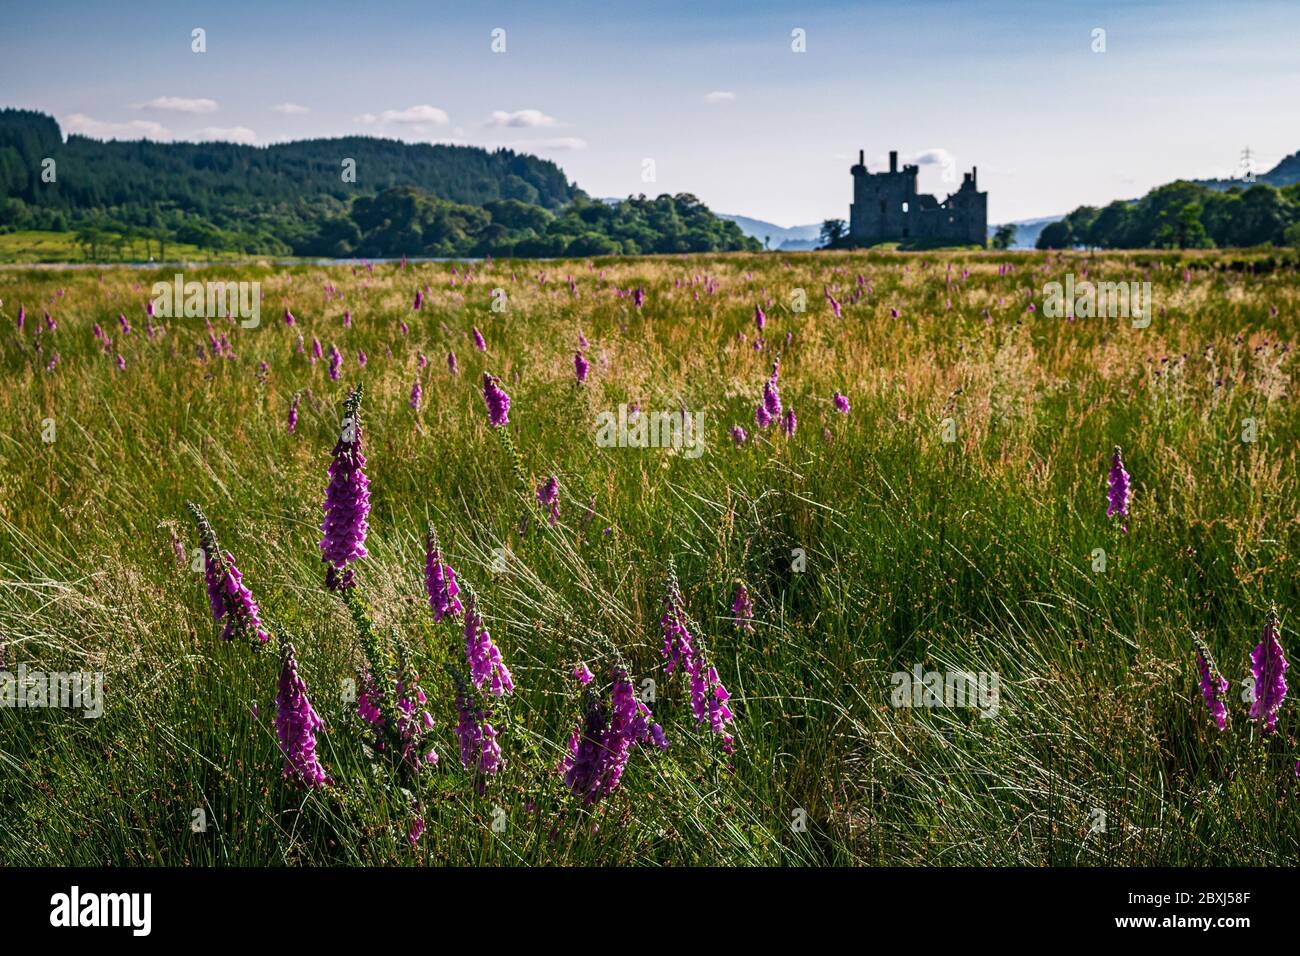 Scottish rural summer landscape with a field full of purple wildflowers and silhouette of Kilchurn Castle in the background. Stock Photo